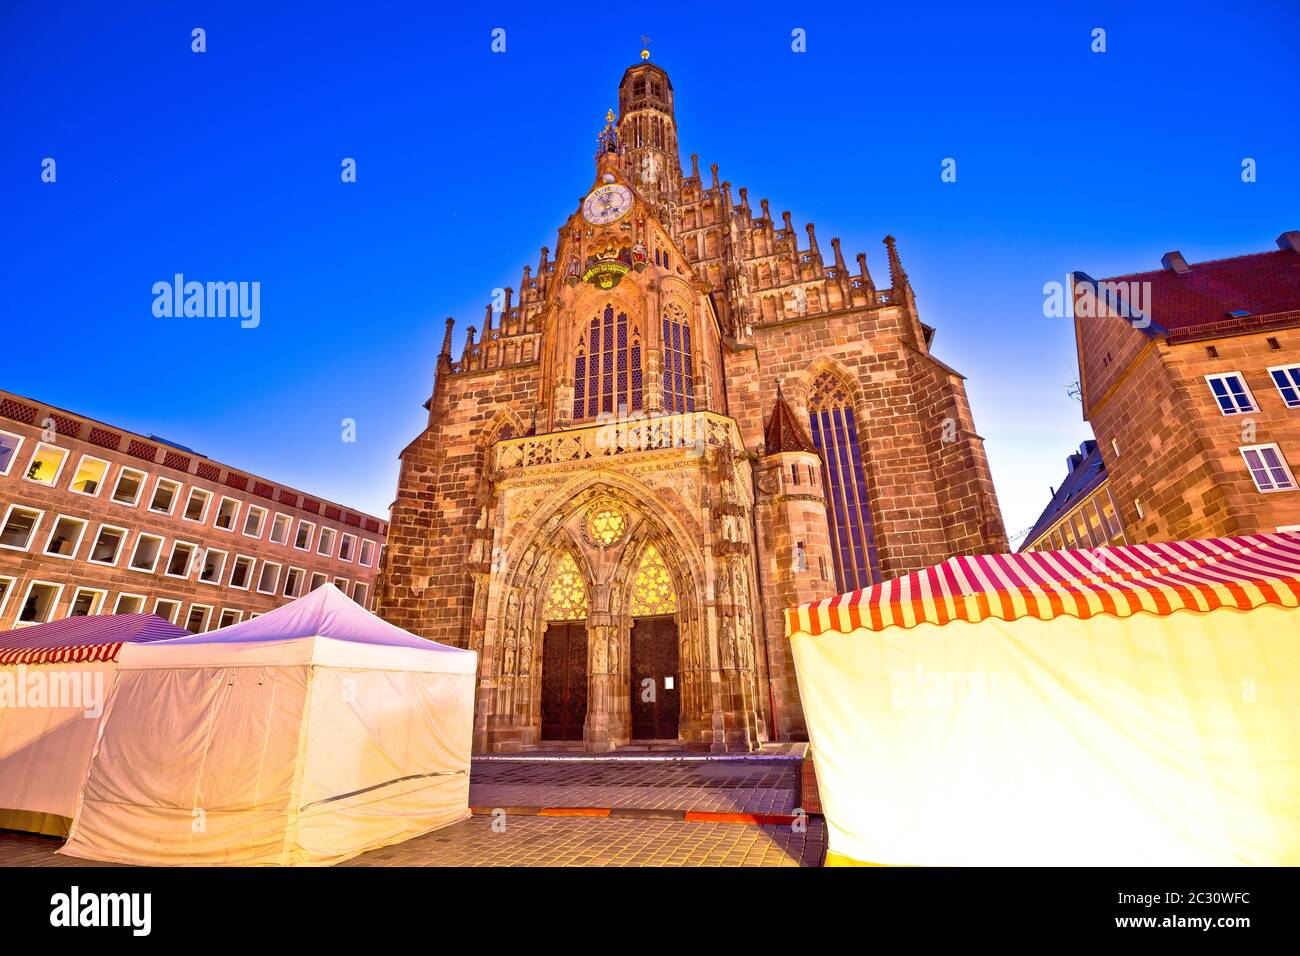 Nurnberg. Church of Our Lady or Frauenkirche in Nuremberg main square dusk view Stock Photo